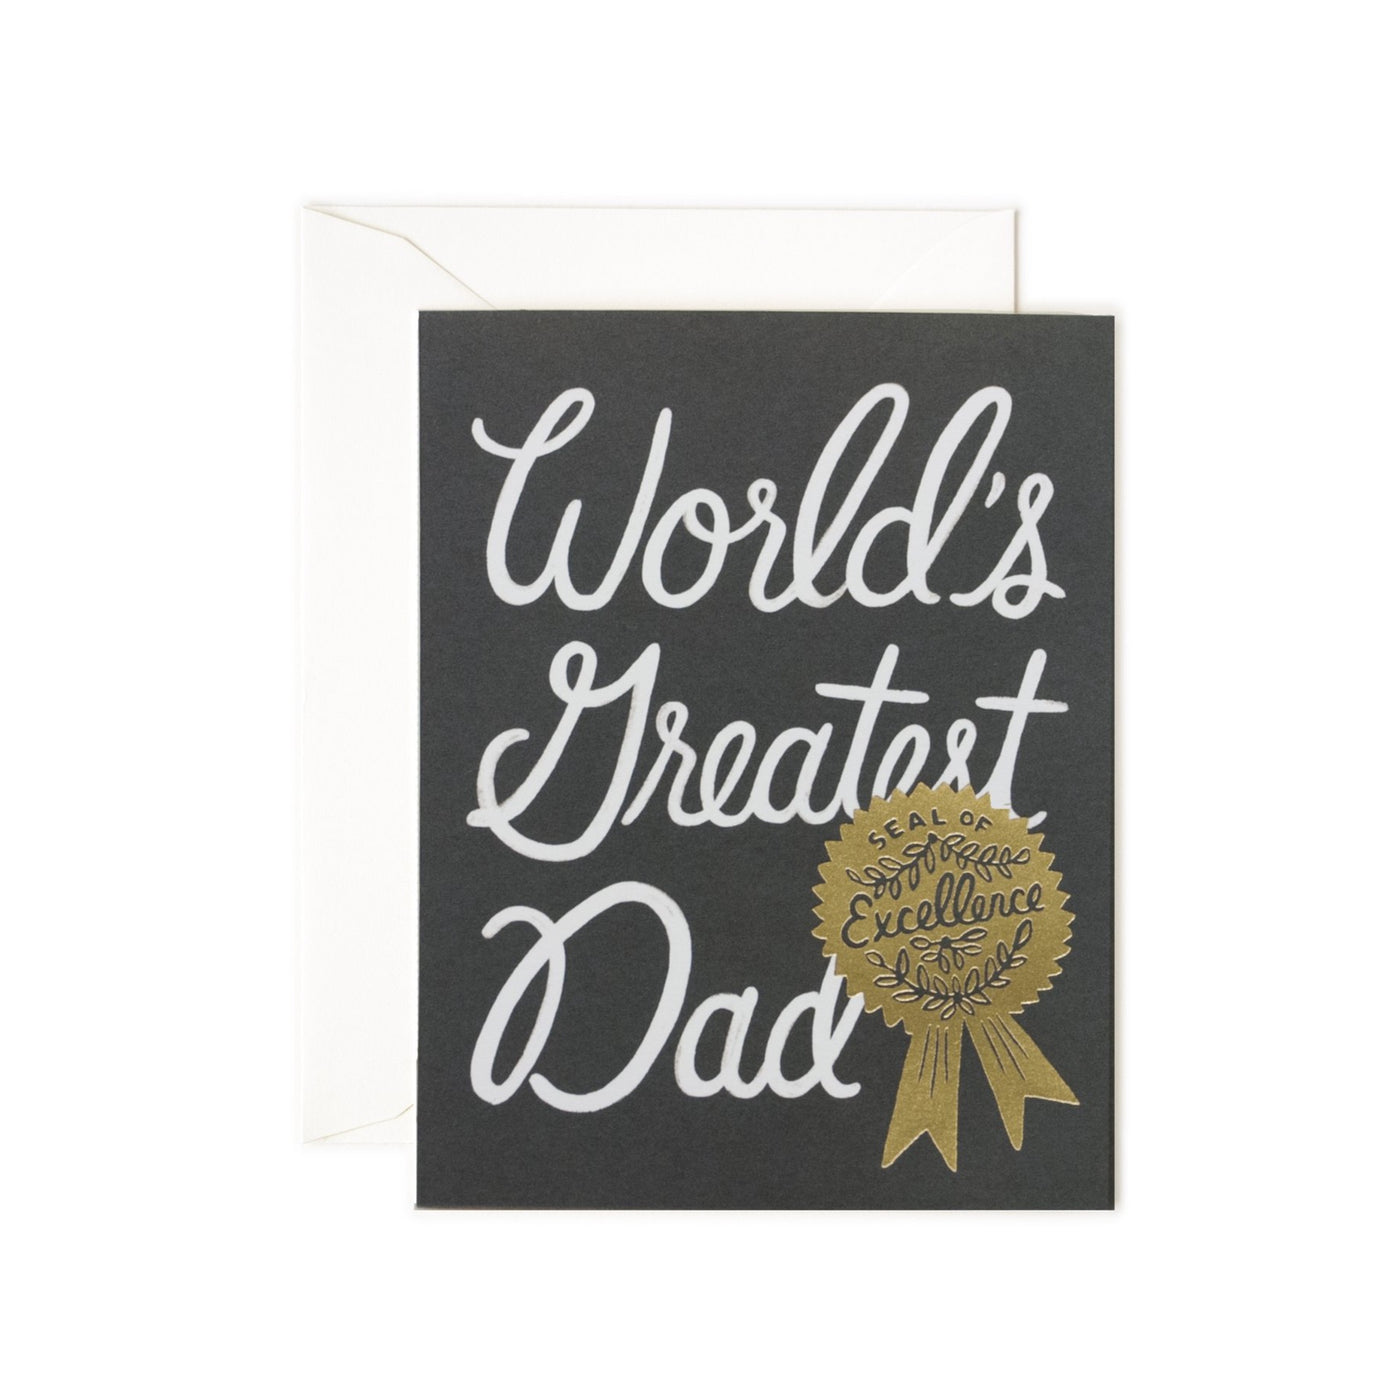 World's Greatest Dad Father's Day - Greetings Card by Rifle Paper Co